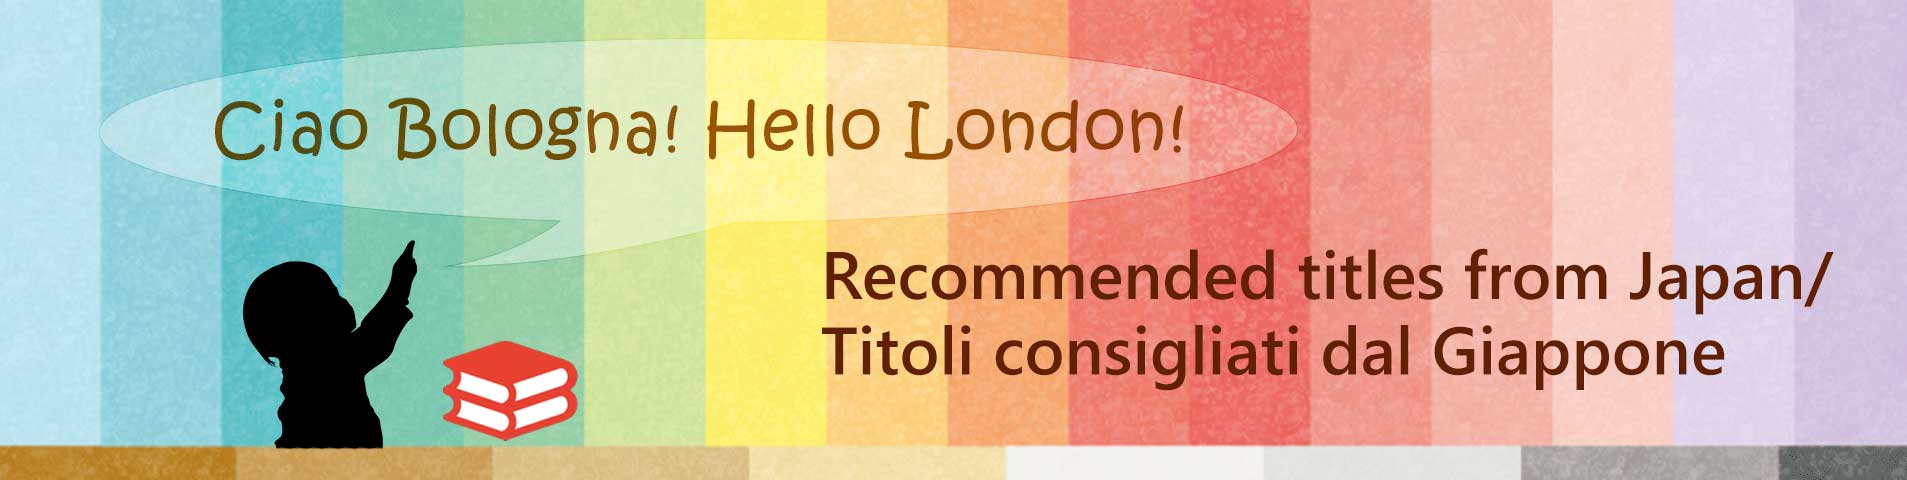 Recommended titles from Japan/ Titoli consigliati dal Giappone